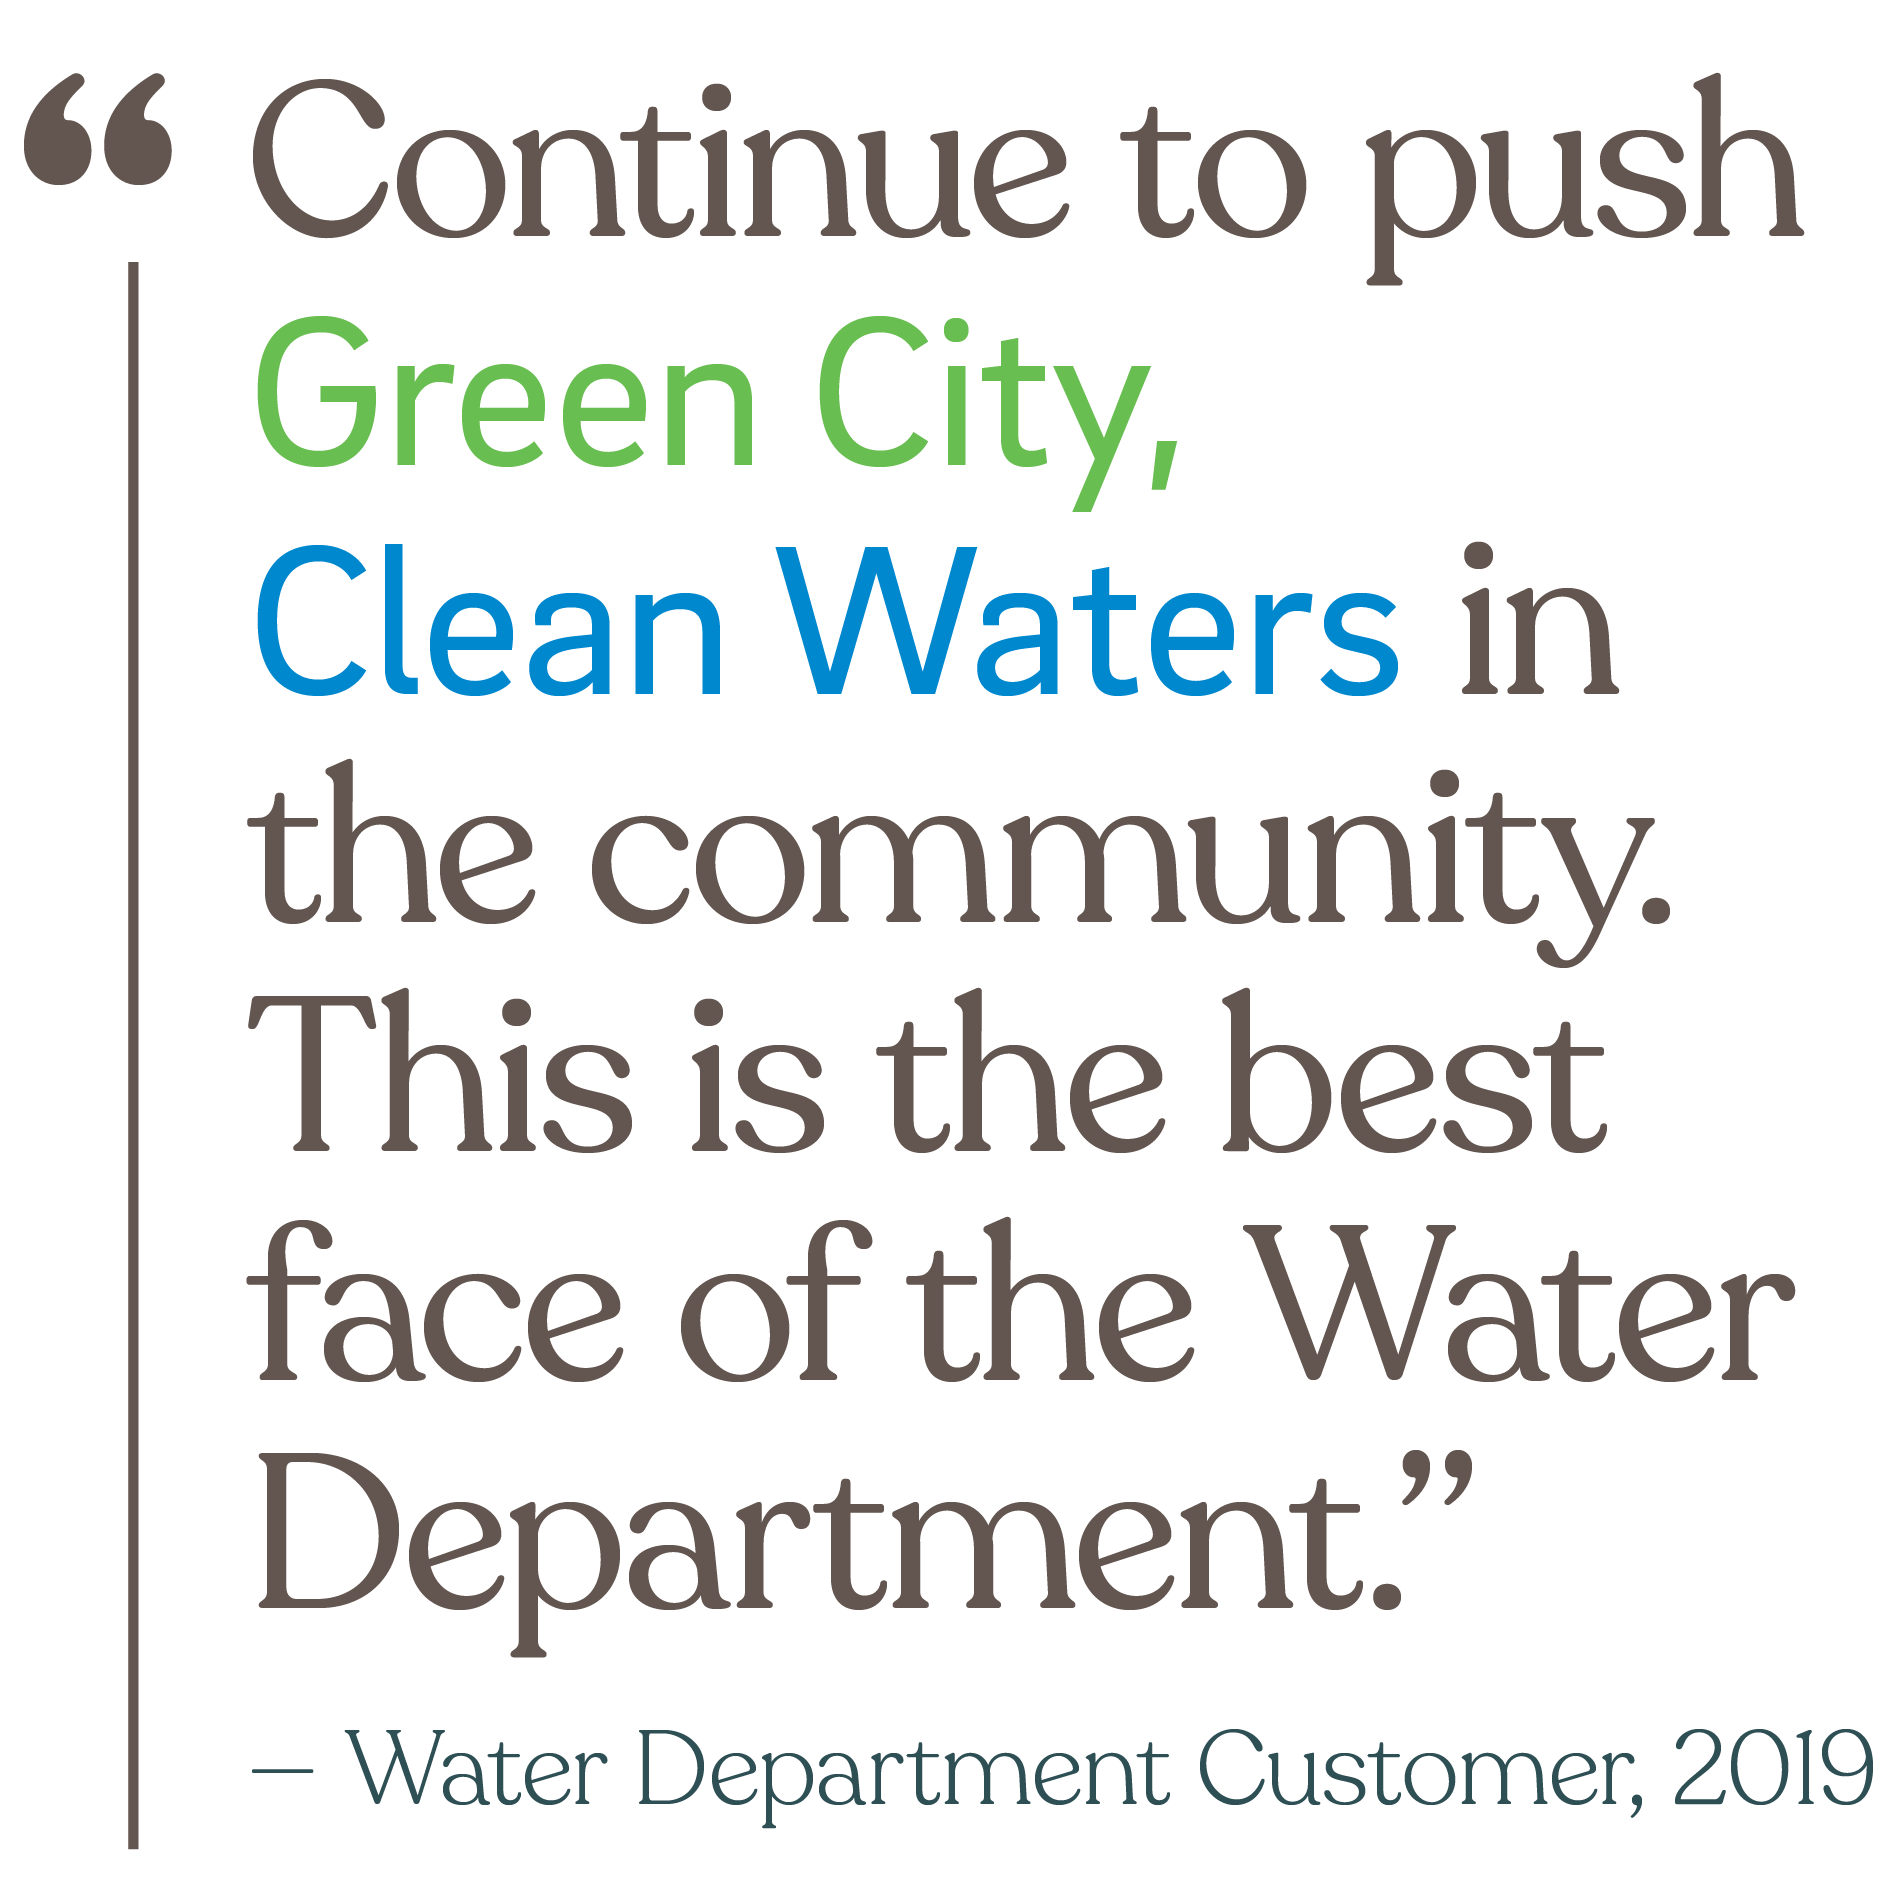 Continue to push Green City, Clean Waters in the community. This is the best face of the Water Department. (from a Water Department Customer in 2019)